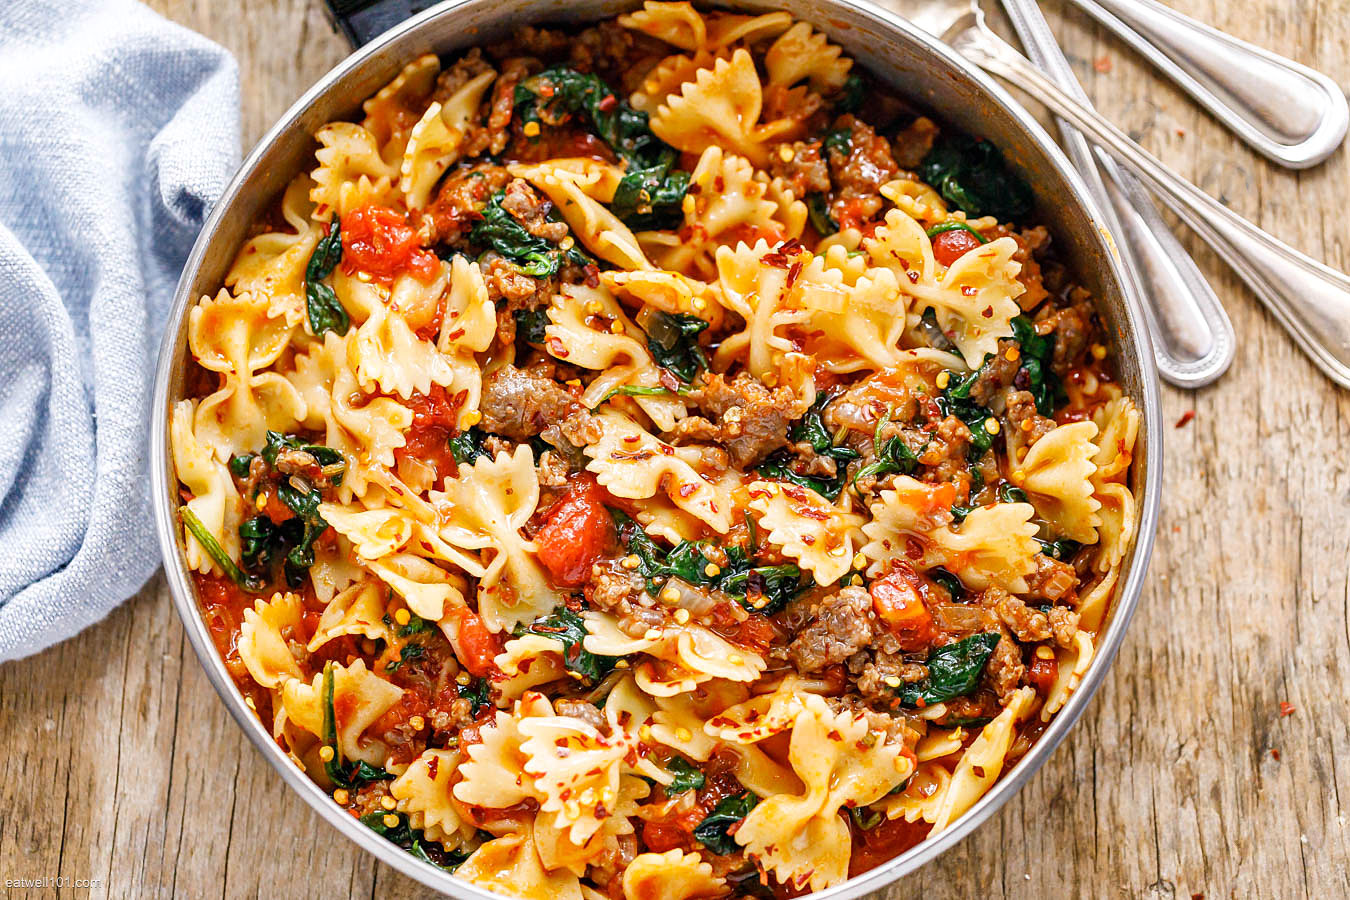 https://www.eatwell101.com/wp-content/uploads/2019/10/Tomato-Spinach-Sausage-Pasta.jpg